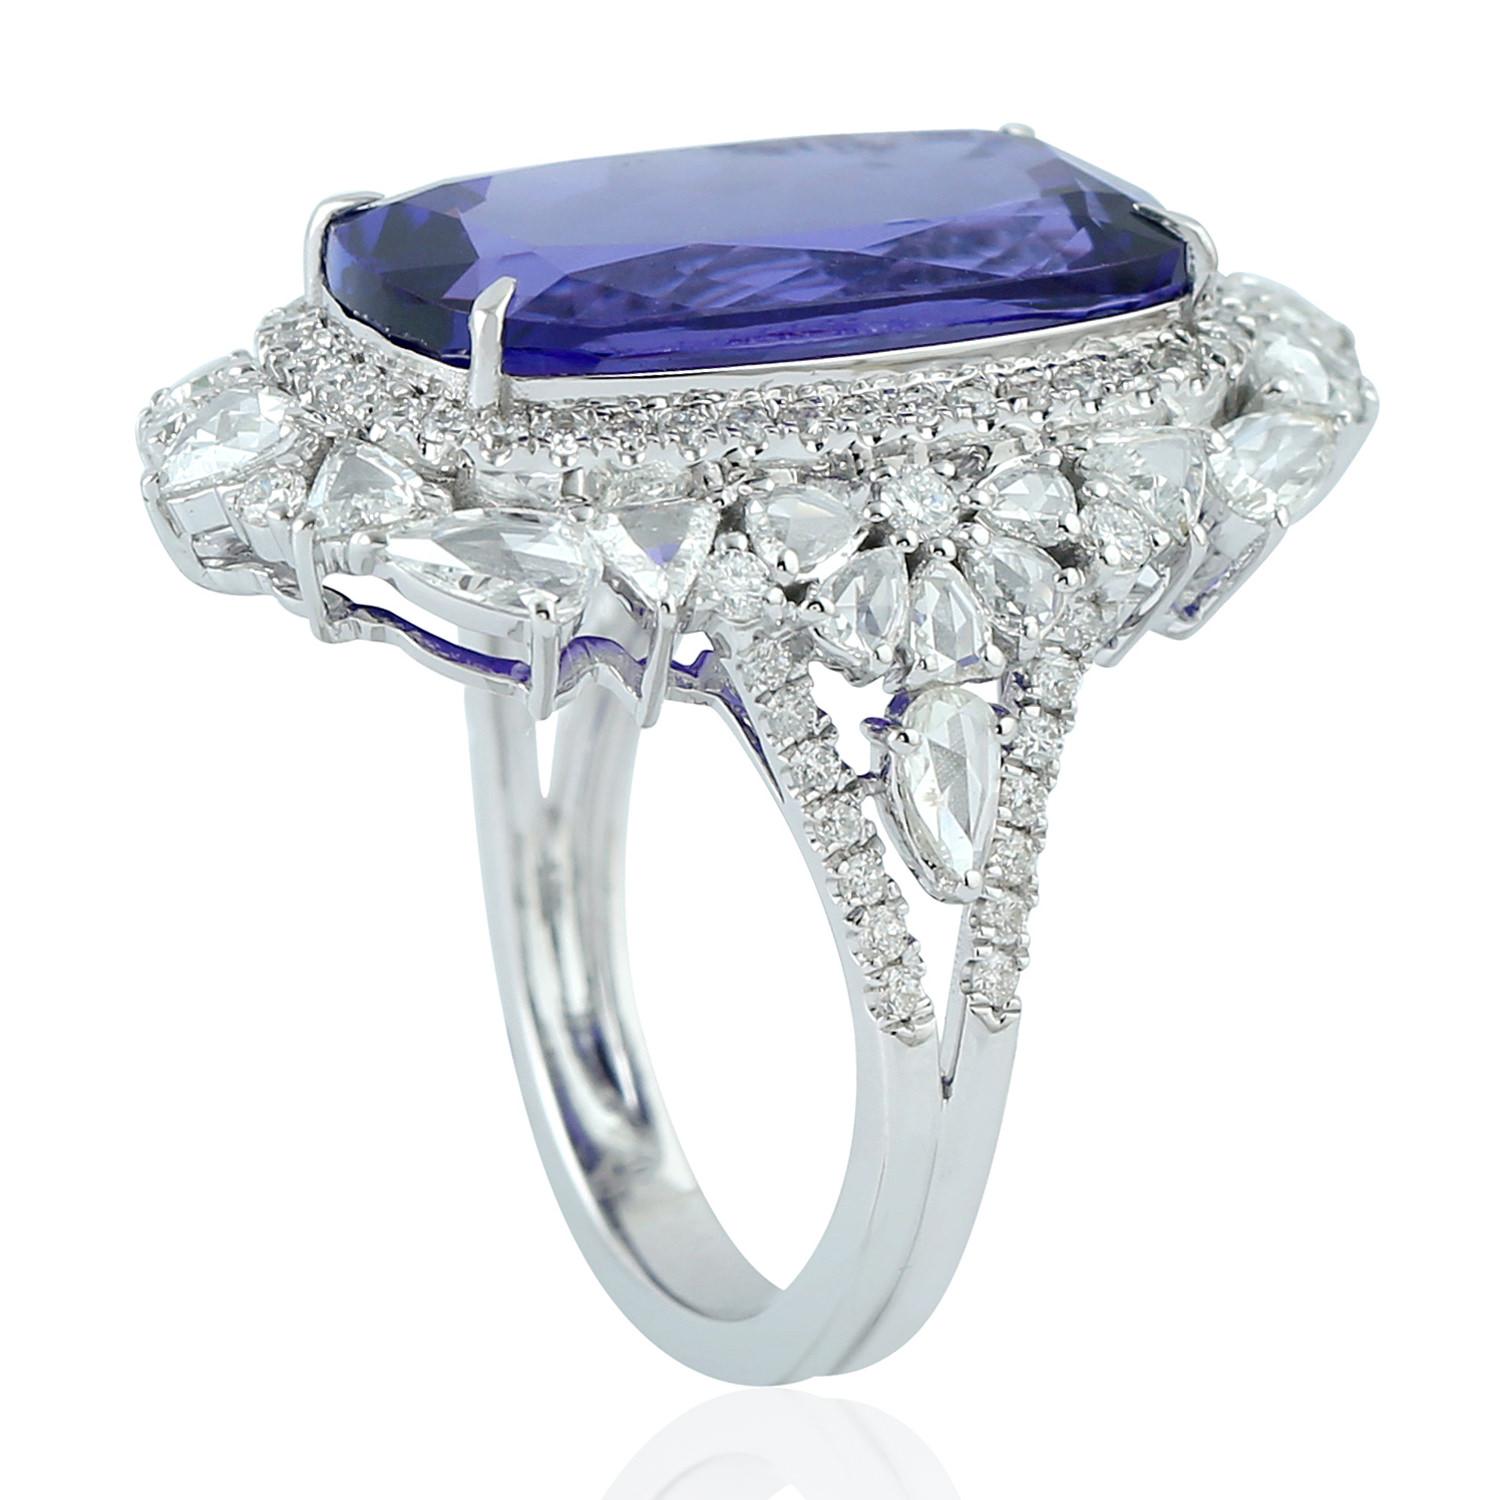 Stunning this Cushion Shape Tanzanite Ring with White Diamonds in 18K white Gold is like from dreams, it sits perfectly on the finger.

Ring Size: 7 ( can be sized for a cost )

18KT: 8.051gms
Diamond: 2.10ct
Tanzanite: 14.21ct